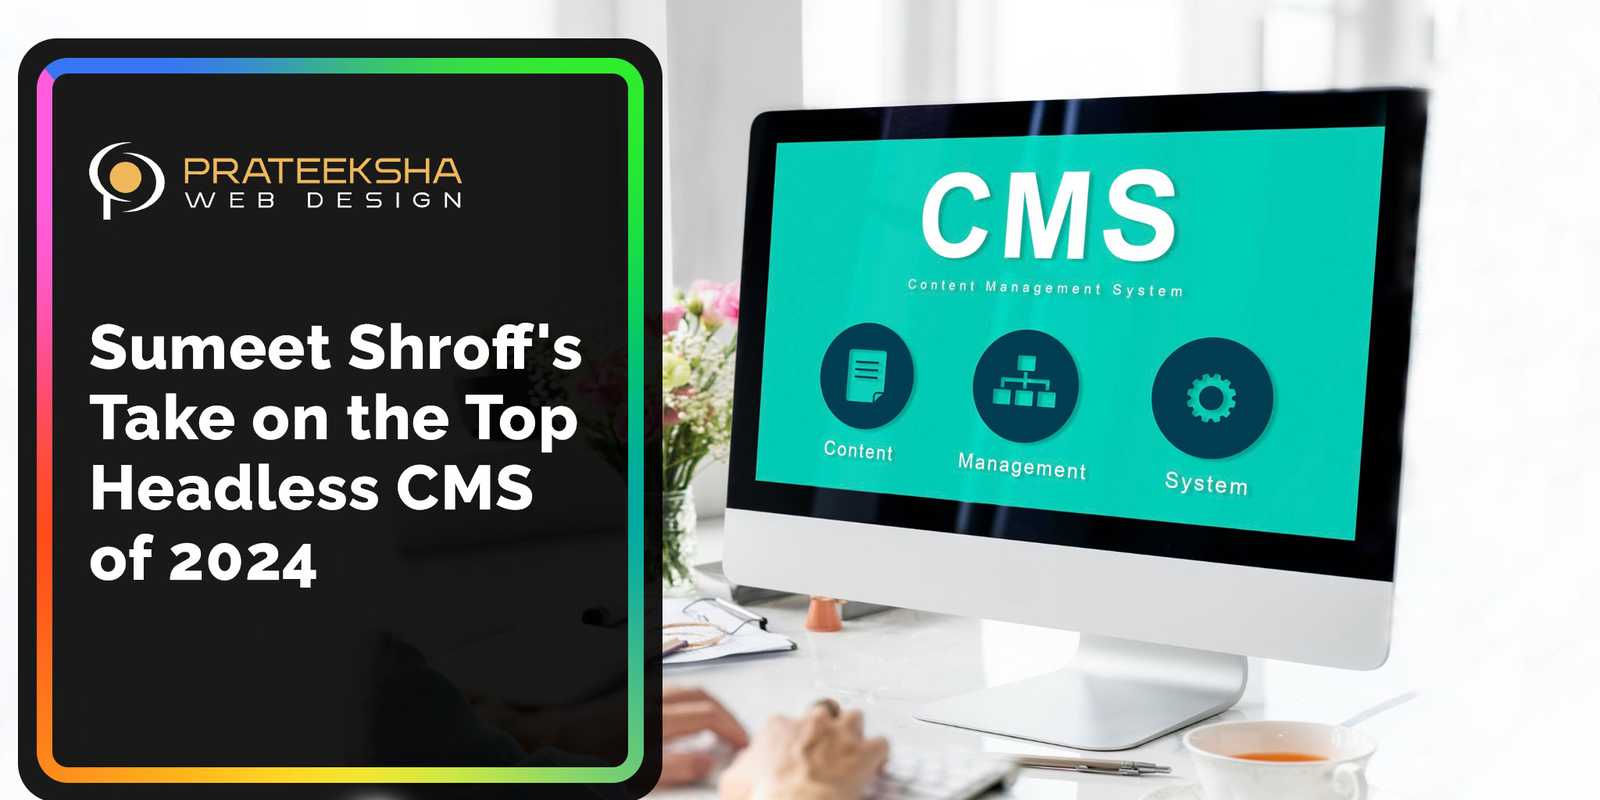 Sumeet Shroff's Take on the Top 12 Headless CMS of 2024